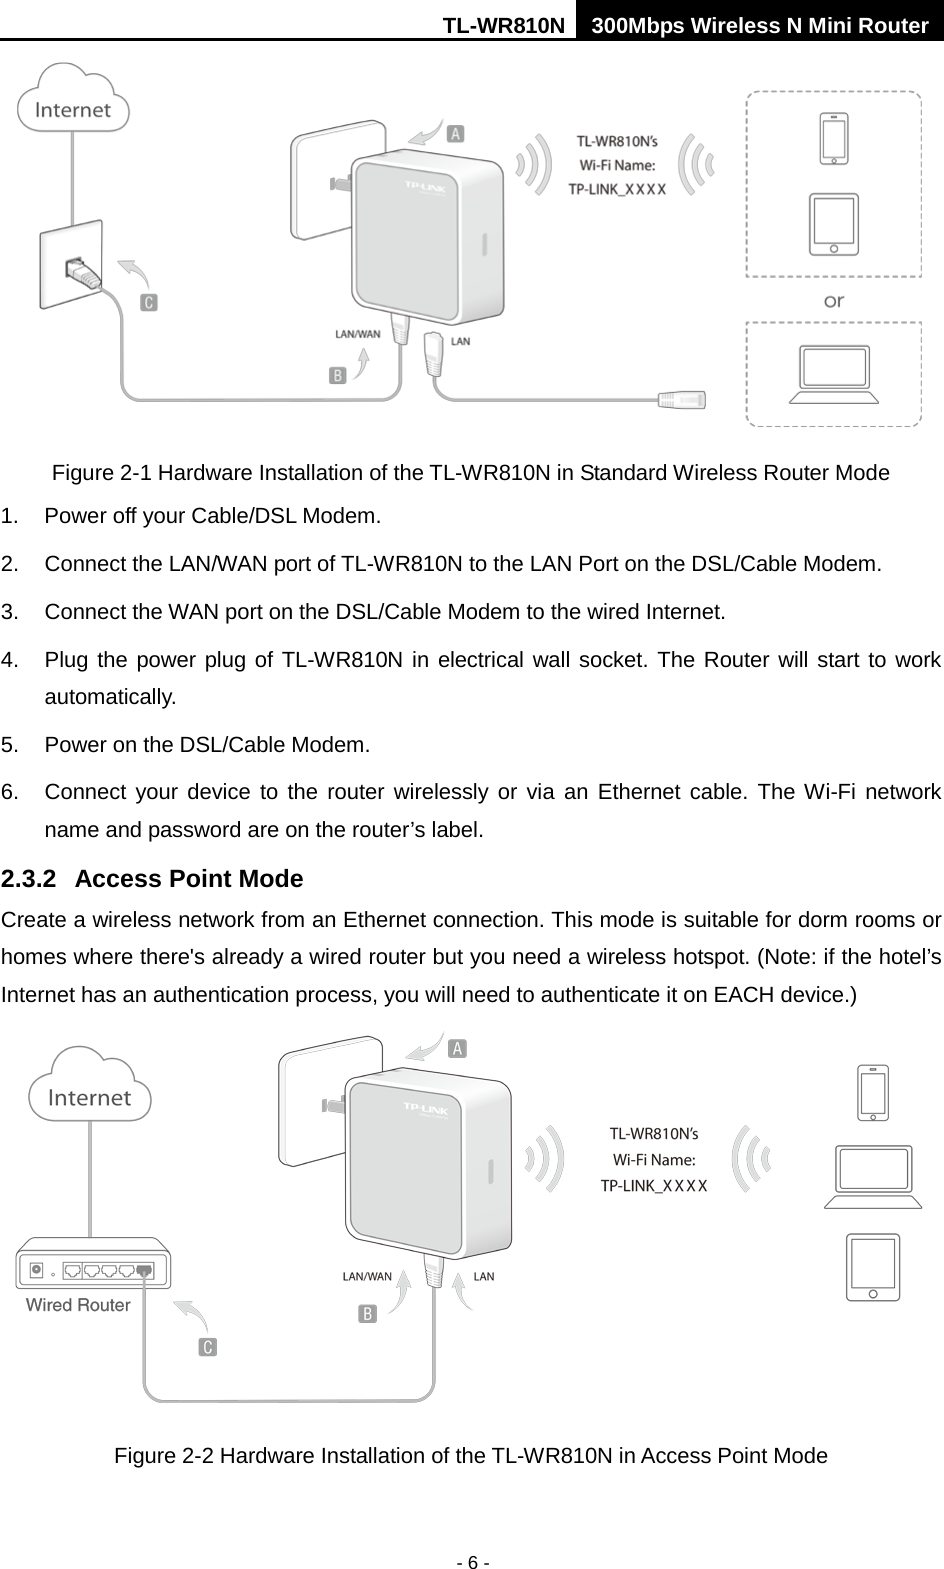 TL-WR810N 300Mbps Wireless N Mini Router  - 6 -  Figure 2-1 Hardware Installation of the TL-WR810N in Standard Wireless Router Mode 1. Power off your Cable/DSL Modem.   2. Connect the LAN/WAN port of TL-WR810N to the LAN Port on the DSL/Cable Modem. 3. Connect the WAN port on the DSL/Cable Modem to the wired Internet. 4. Plug the power plug of TL-WR810N in electrical wall socket. The Router will start to work automatically. 5. Power on the DSL/Cable Modem. 6. Connect your device to the router wirelessly or via an Ethernet cable. The Wi-Fi network name and password are on the router’s label. 2.3.2  Access Point Mode Create a wireless network from an Ethernet connection. This mode is suitable for dorm rooms or homes where there&apos;s already a wired router but you need a wireless hotspot. (Note: if the hotel’s Internet has an authentication process, you will need to authenticate it on EACH device.)  Figure 2-2 Hardware Installation of the TL-WR810N in Access Point Mode 